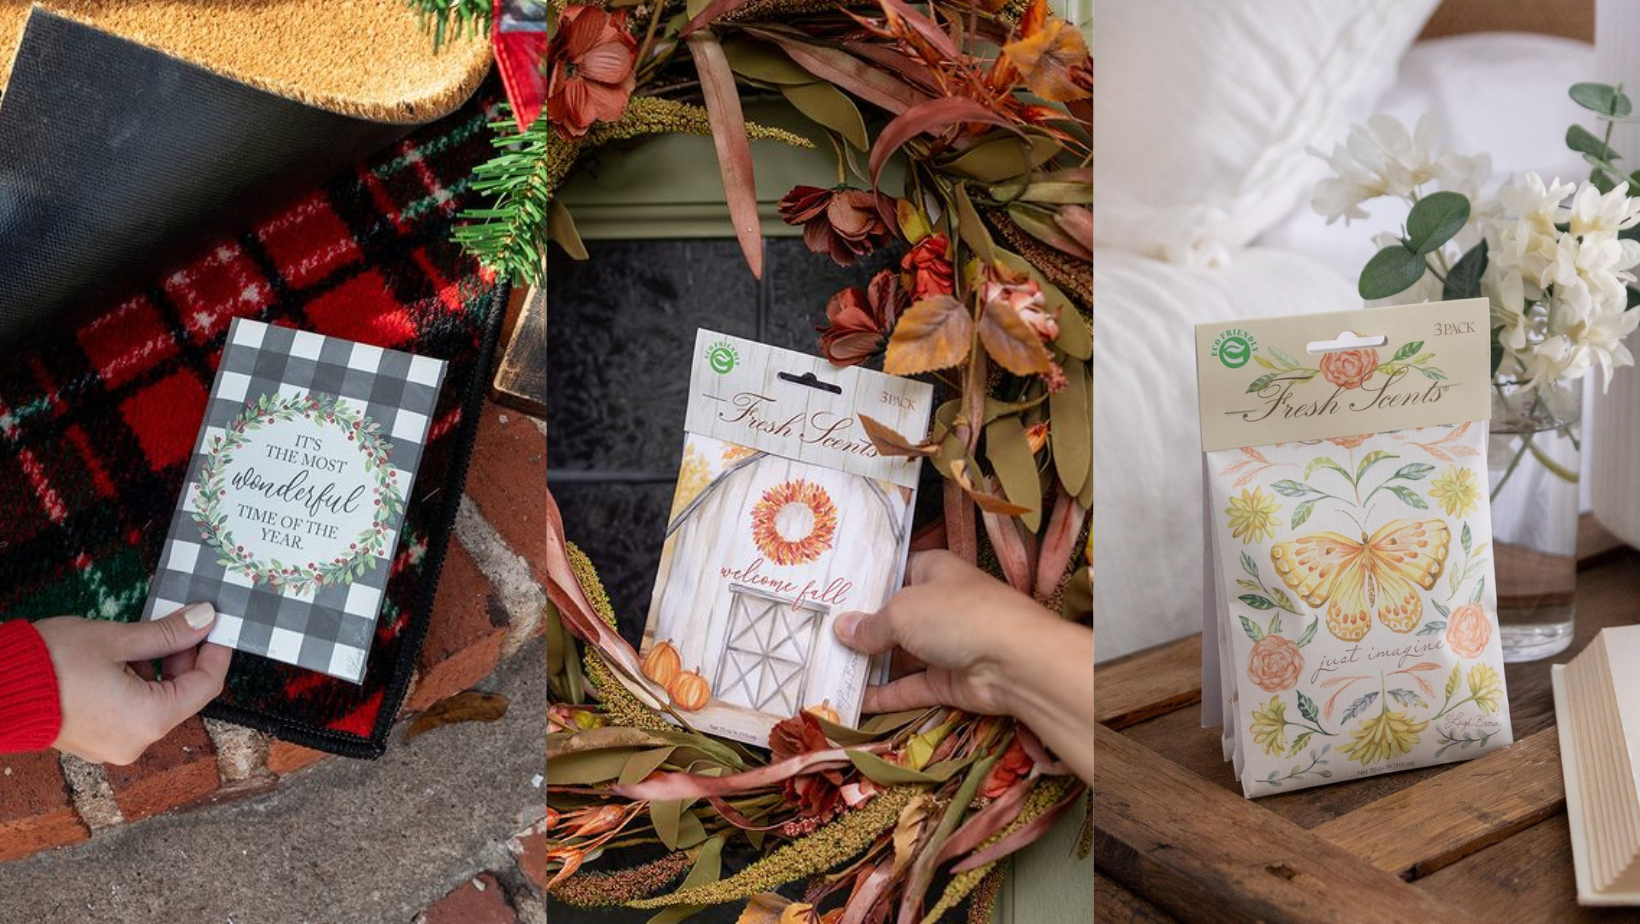 3 ways to use a sachet: under a mat, in a door wreath, and beside a bed on a side table.